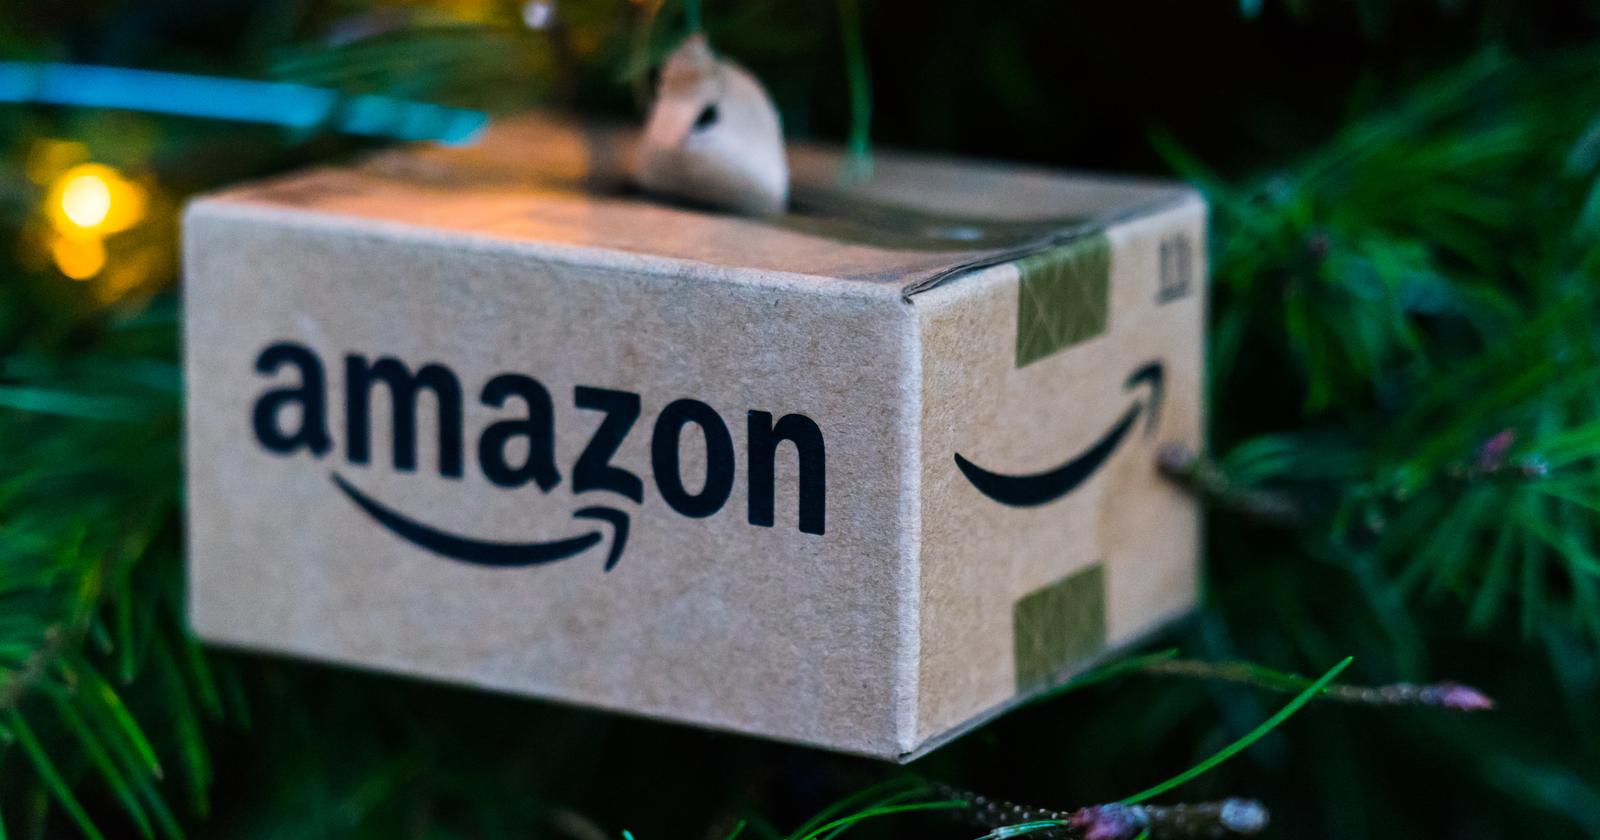 8 Things Amazon Sellers Should Do to Prepare for Q4 Sales